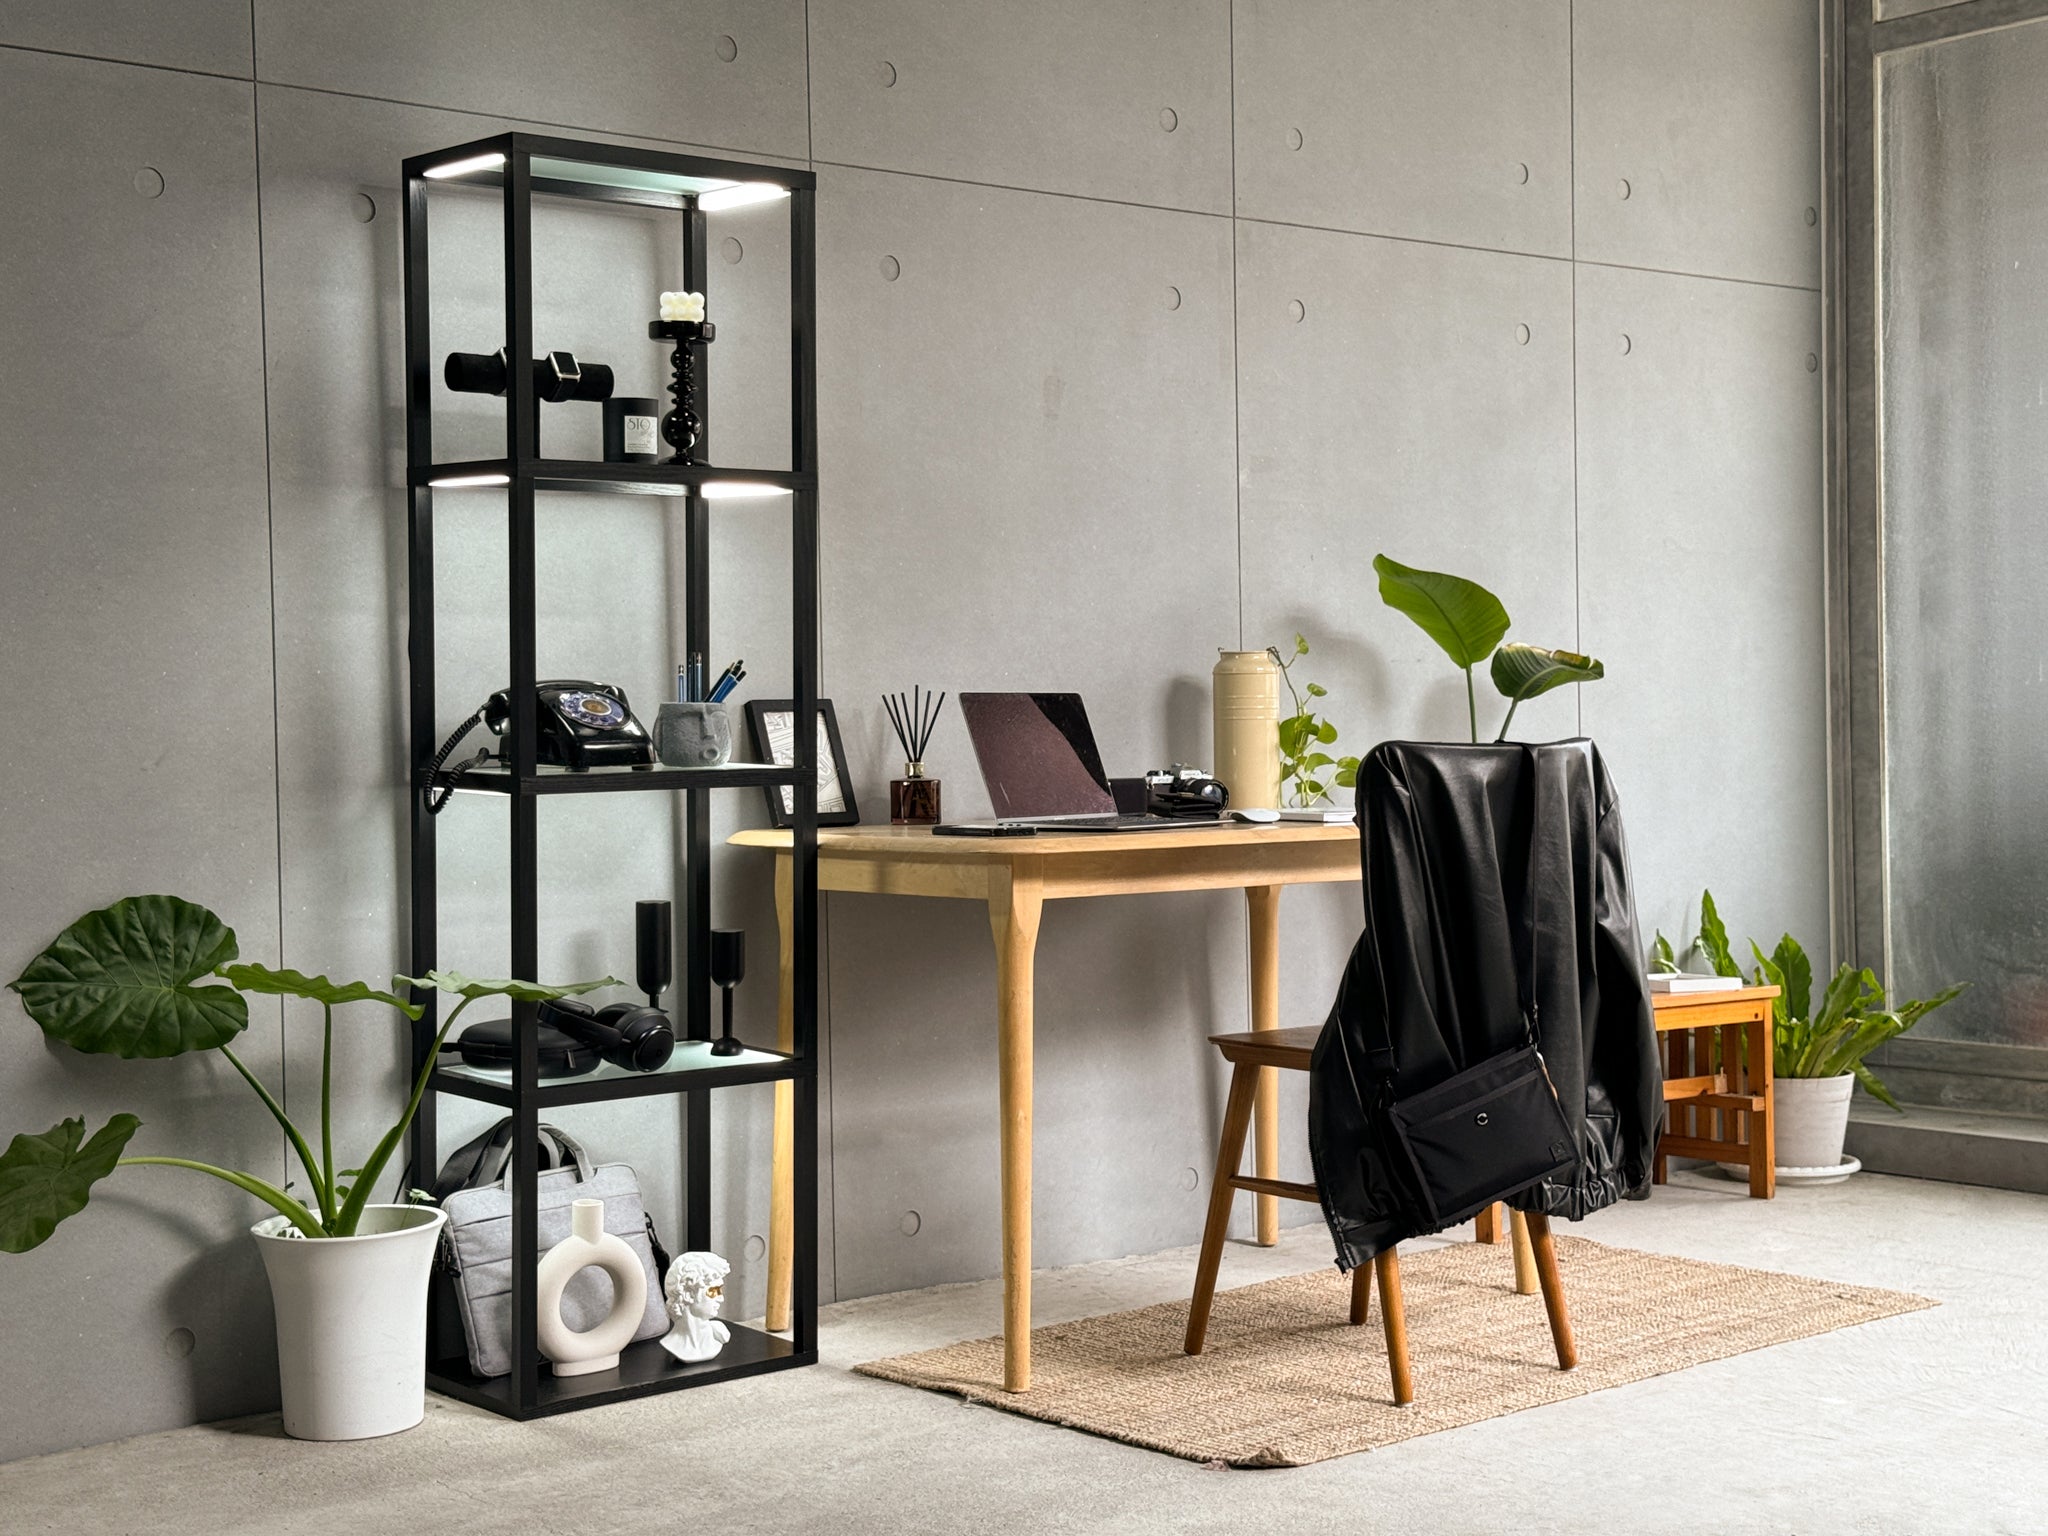 Work from home office for the modern, urban professional